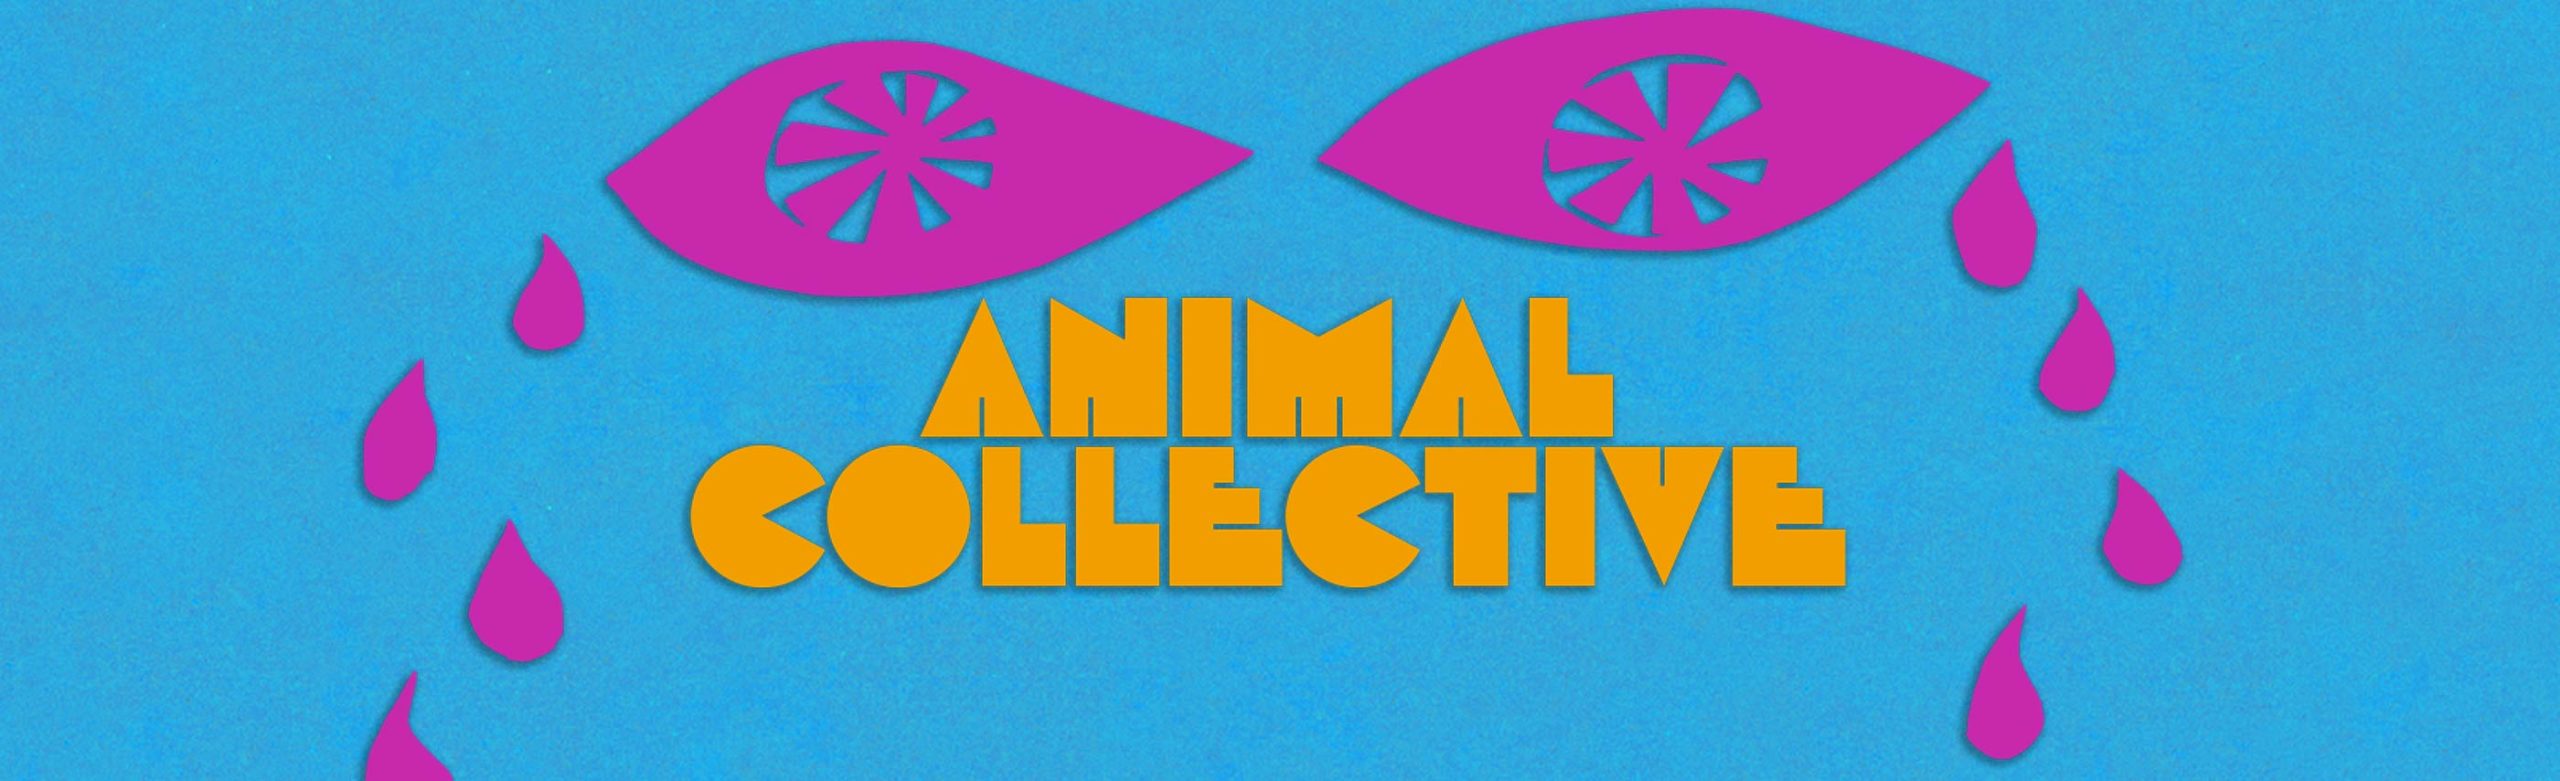 Event Info: Animal Collective at The ELM 2022 Image